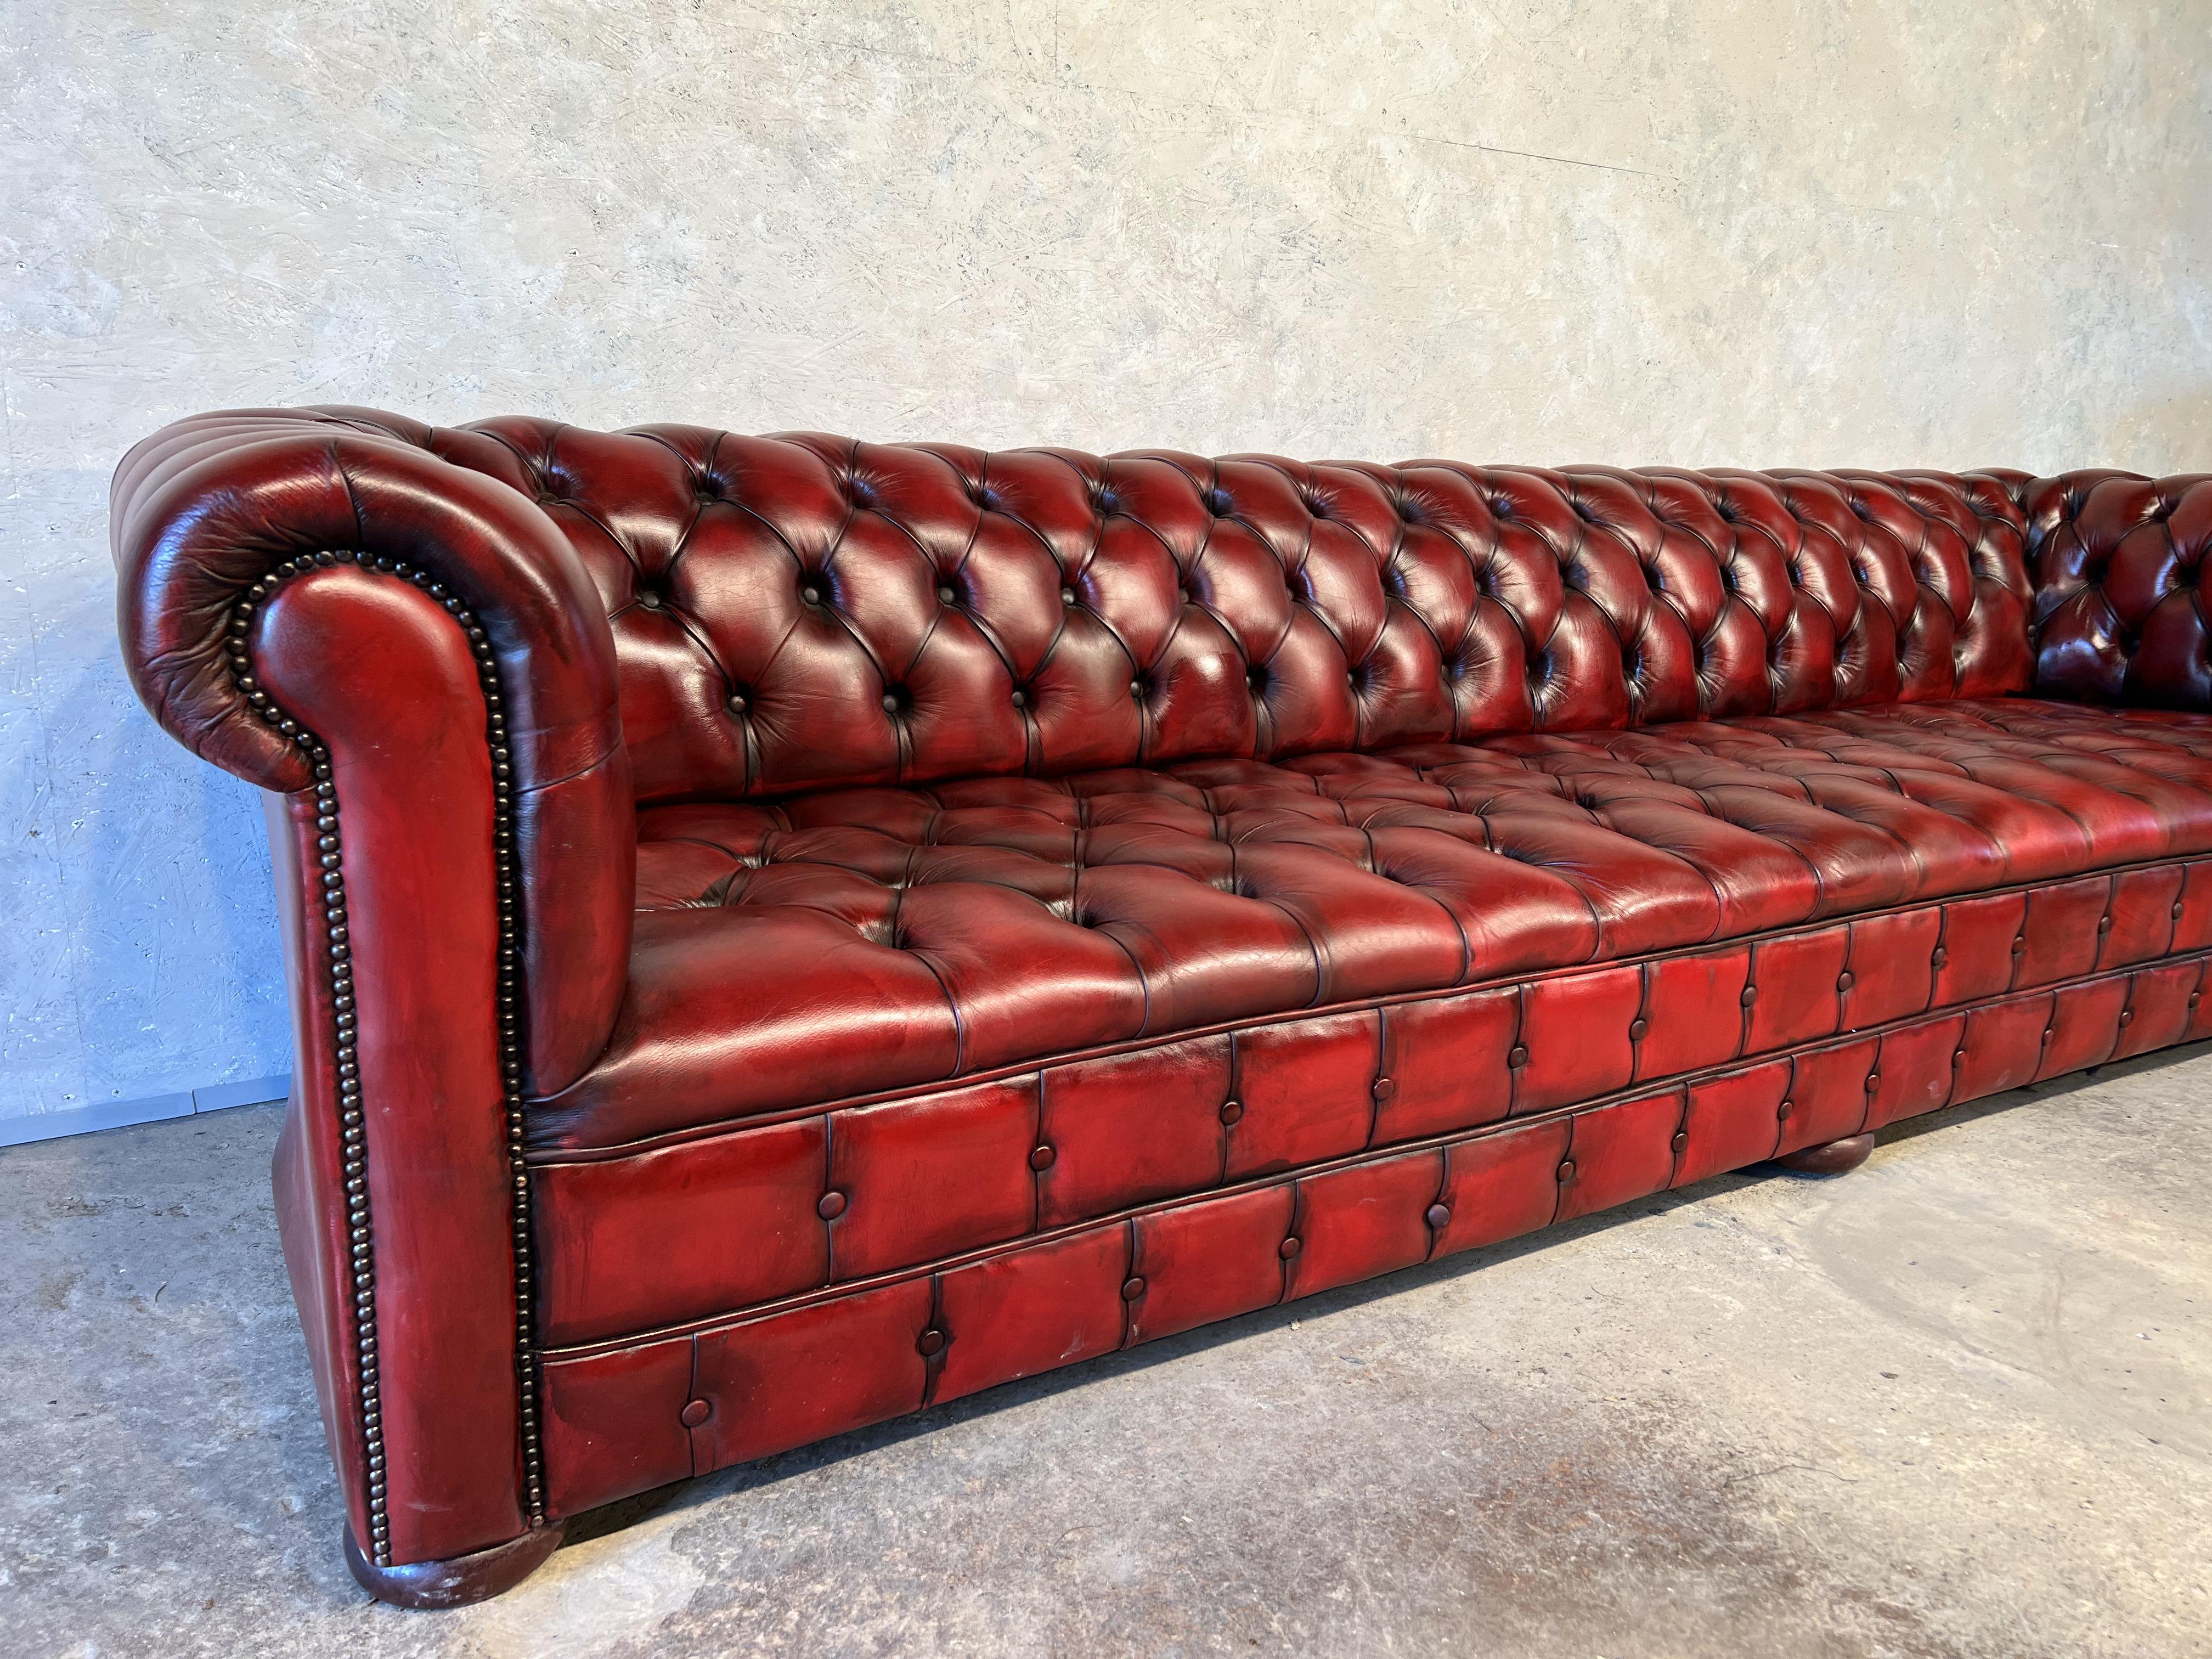 An Impressive 10 Ft Long Hand Dyed Leather Chestnut Brown Chesterfield Sofa.


Fantastic quality premium leather chesterfield in excellent condition, fully buttoned it has a fantastic colour and patina, hand dyed and polished to lovely